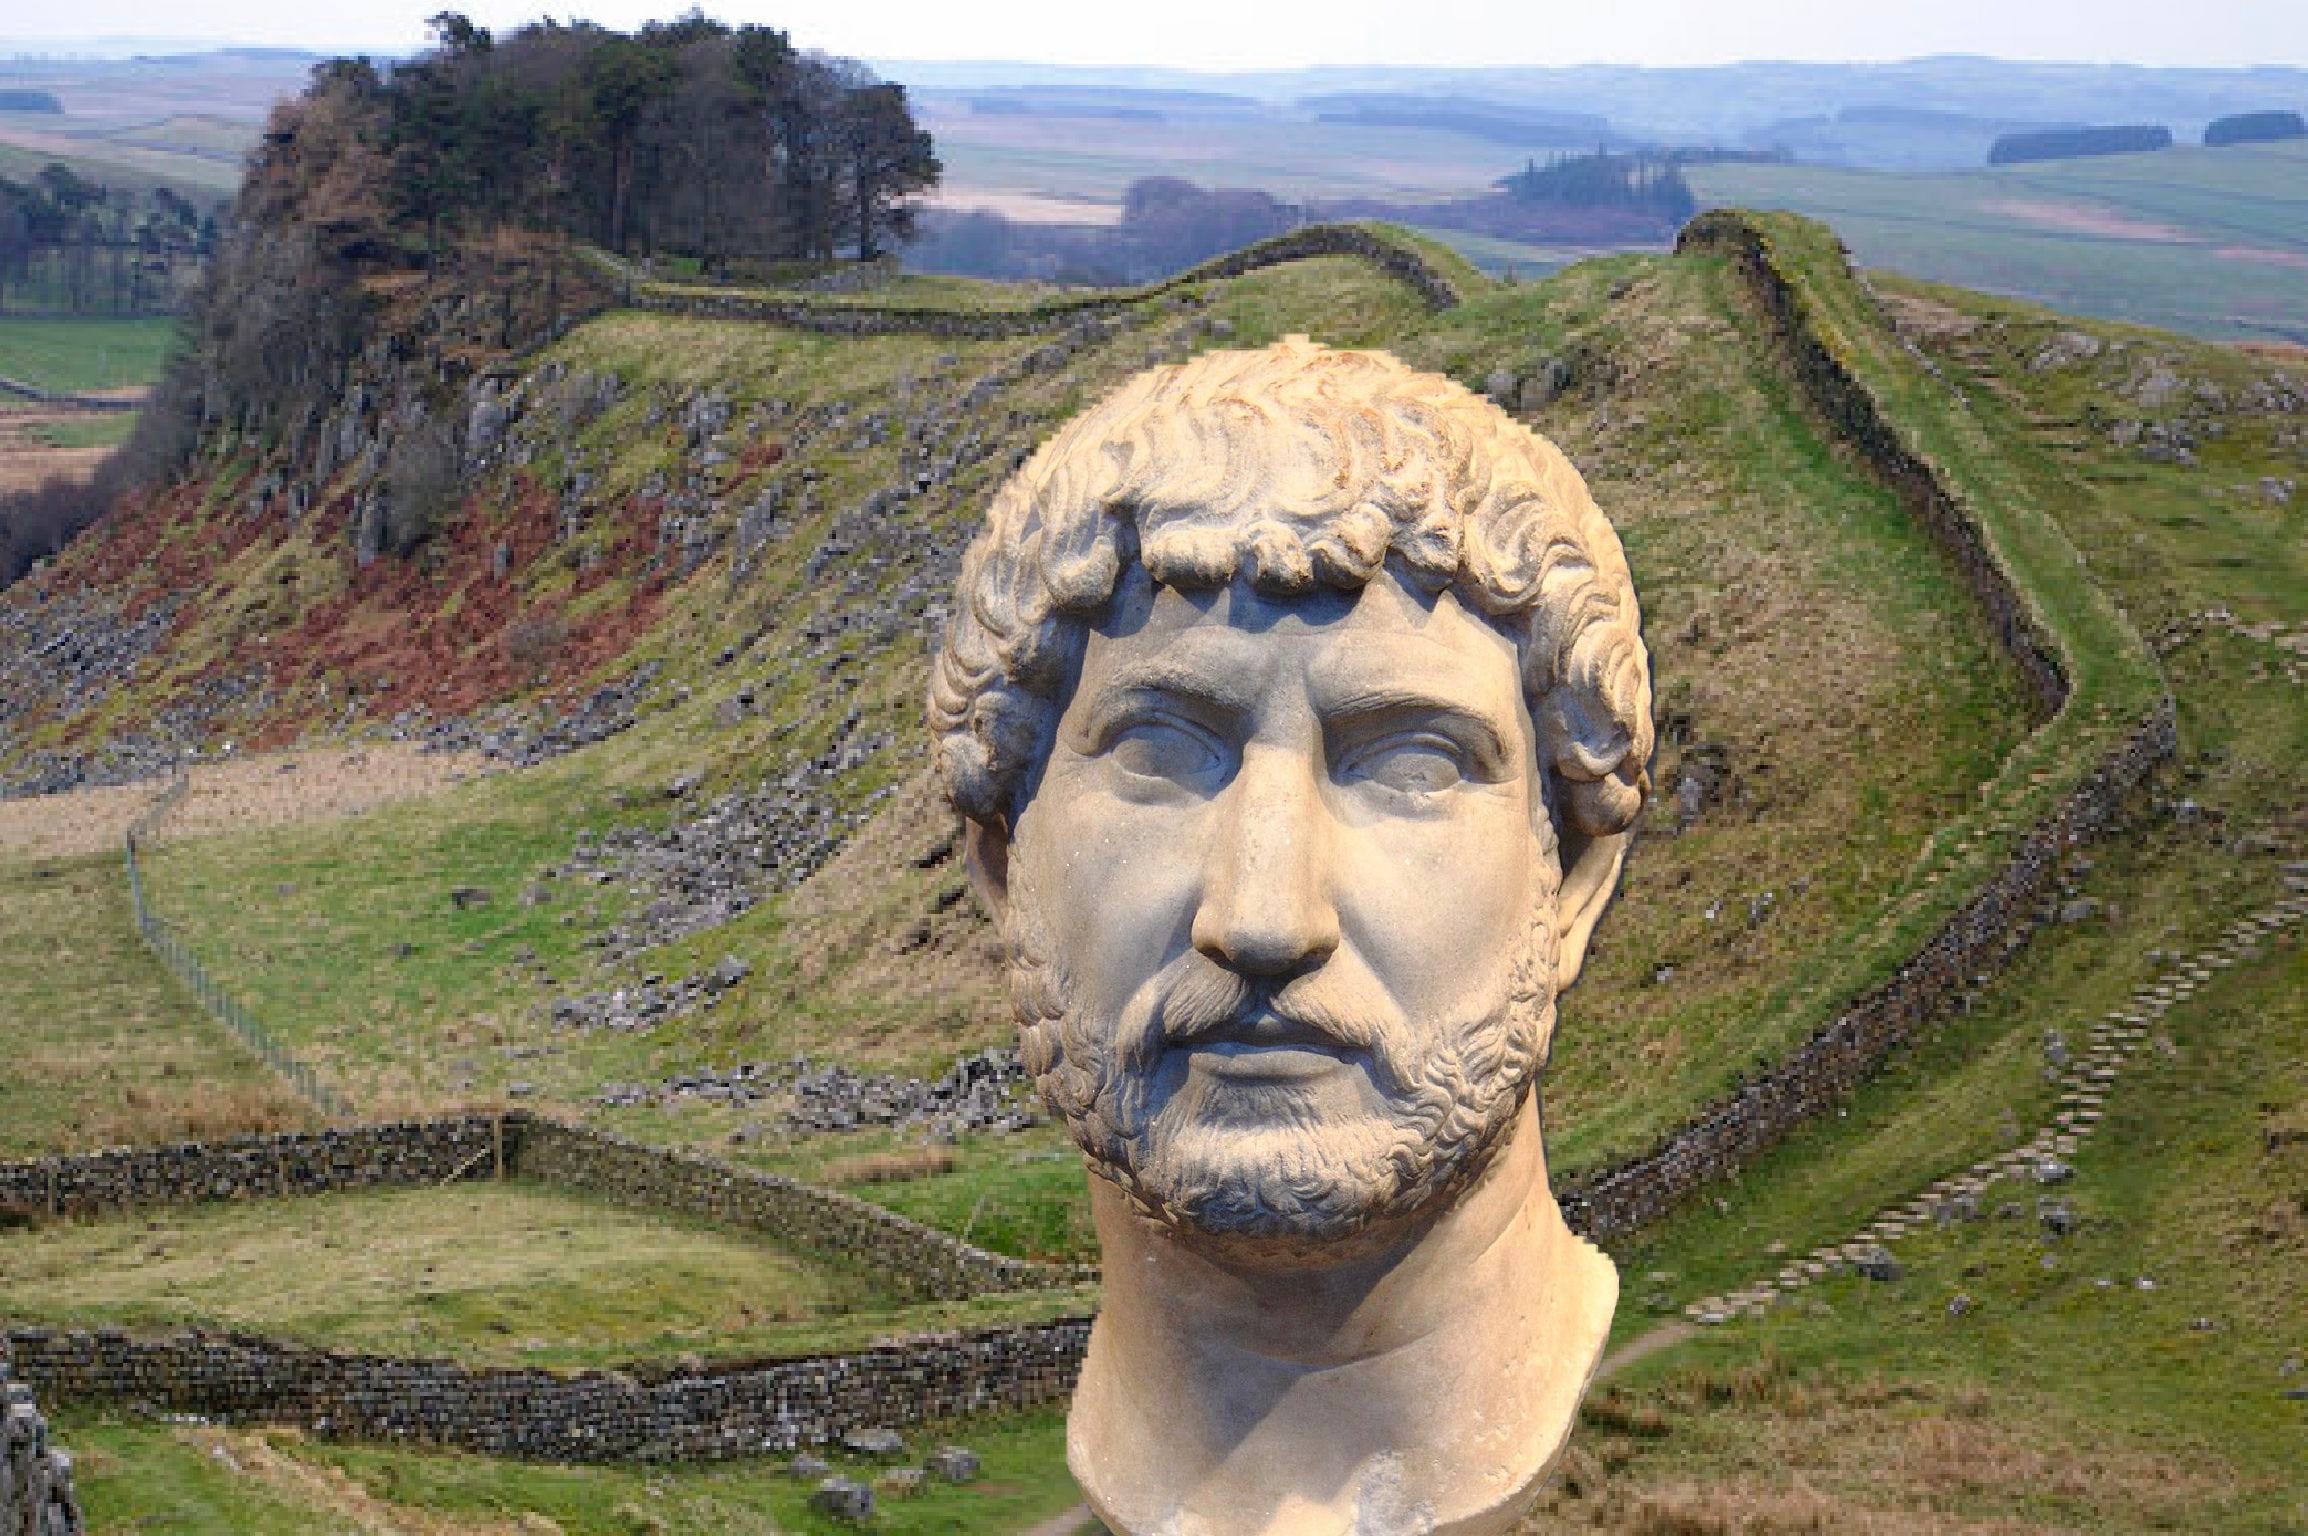 Why building Hadrian’s Wall was a gigantic mistake